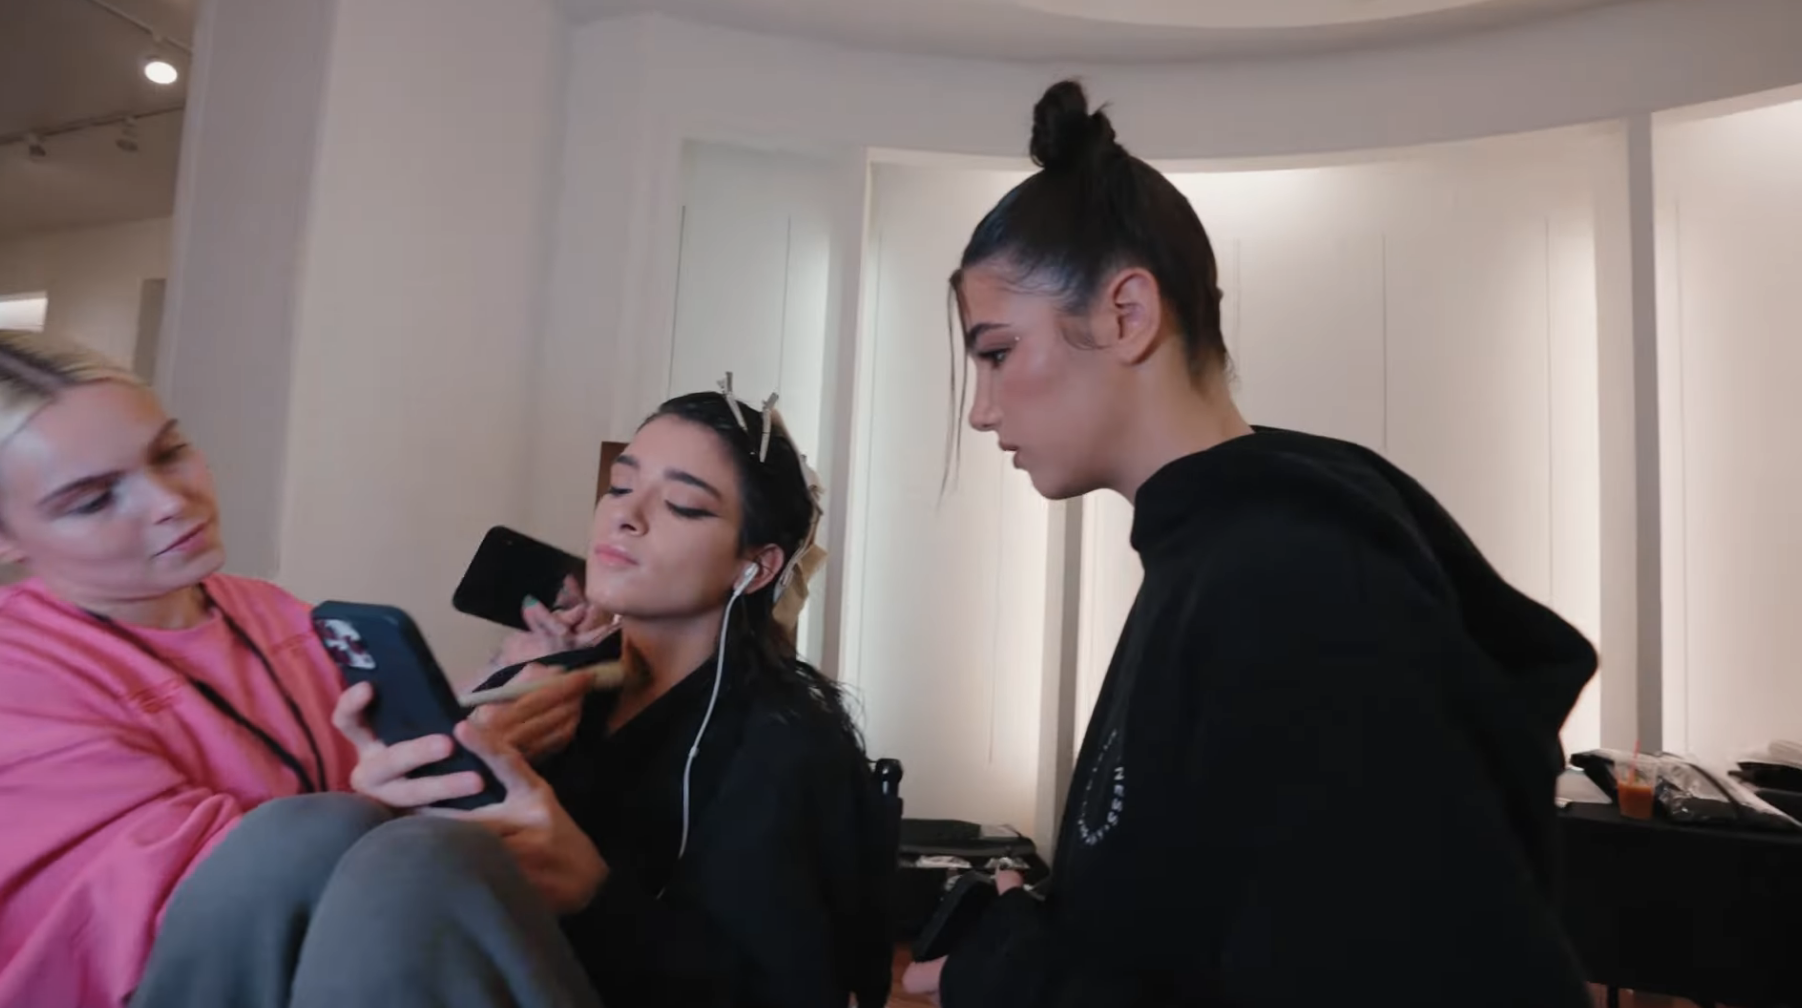 dixie getting her makeup done with charli next to her